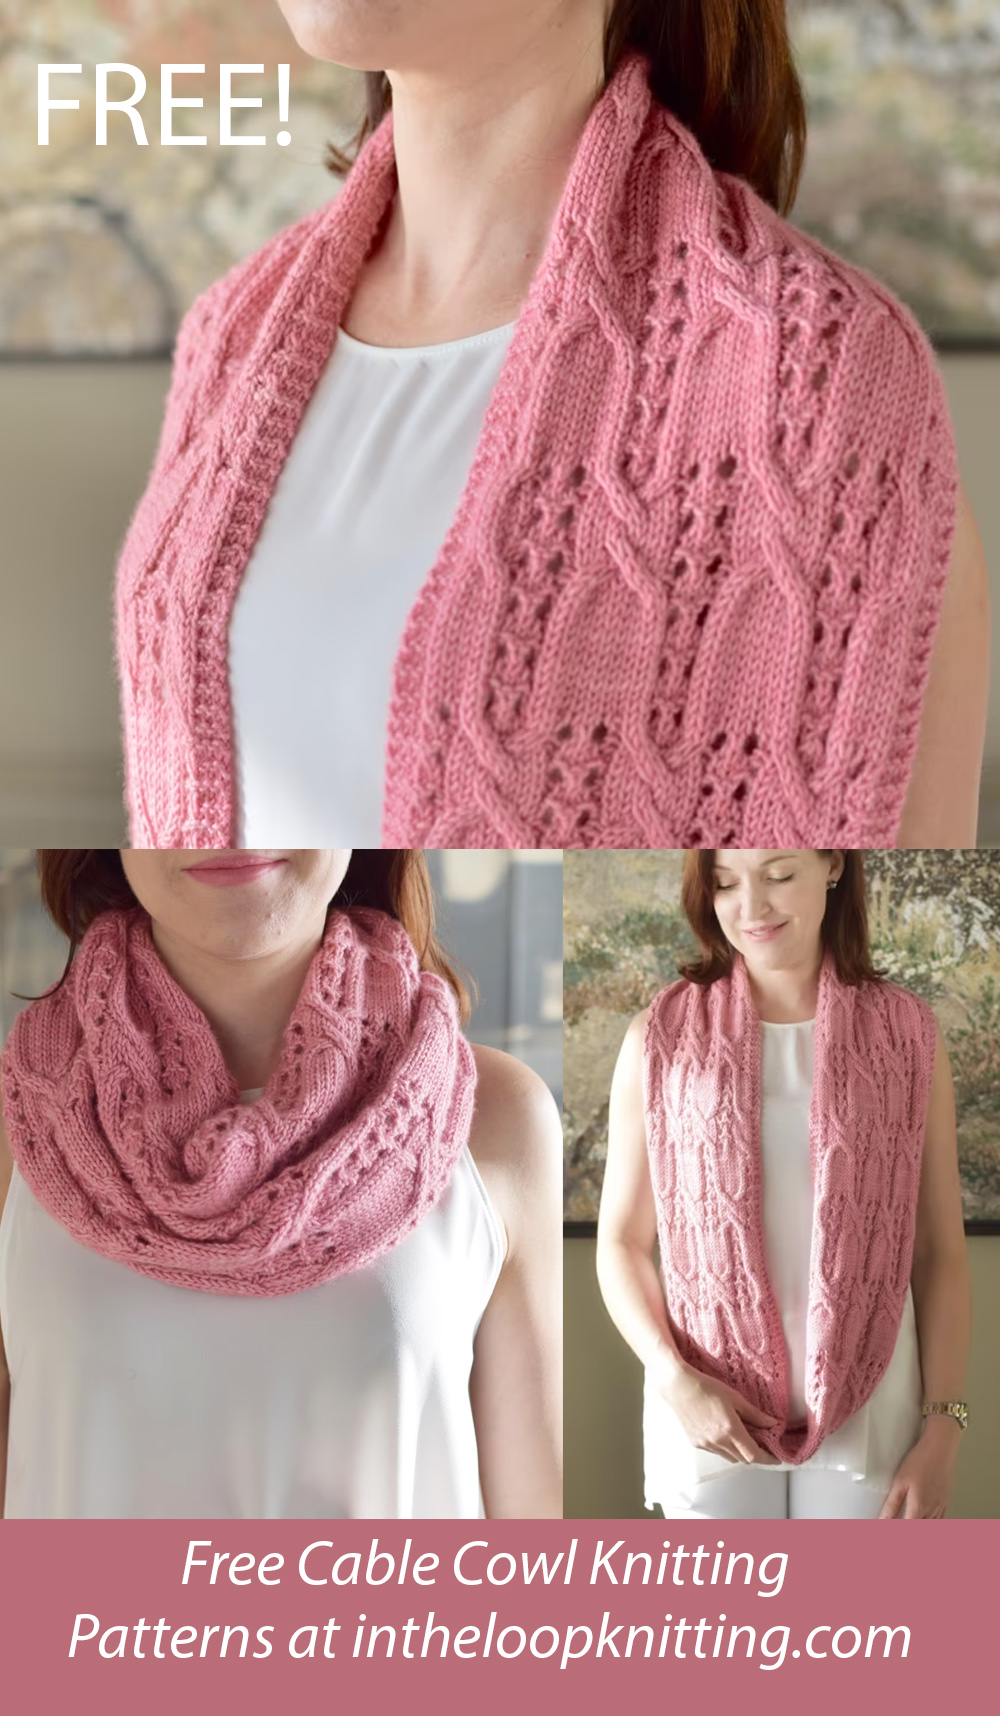 Free Cable and Lace Cowl Knitting Pattern